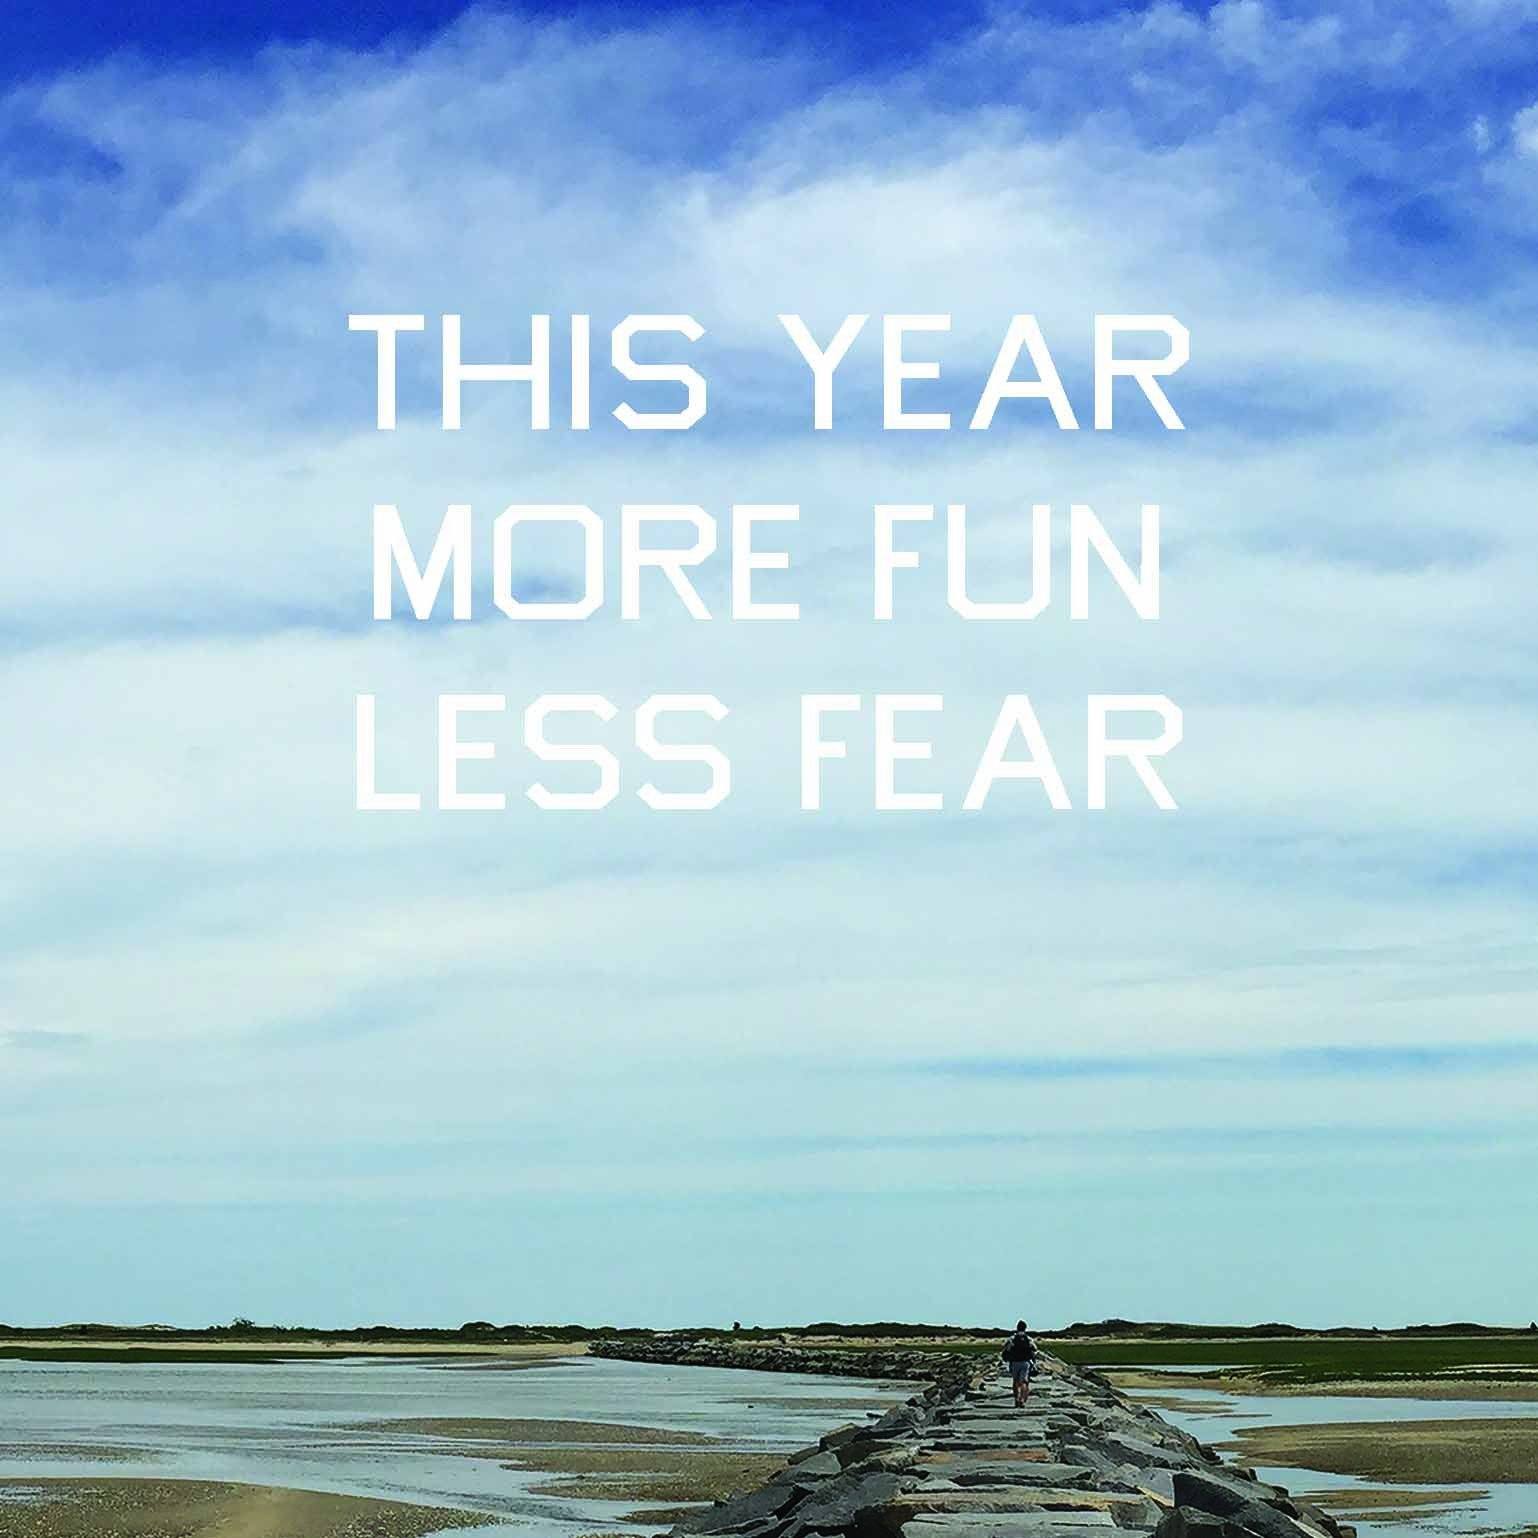 This Year More Fun Less Fear!